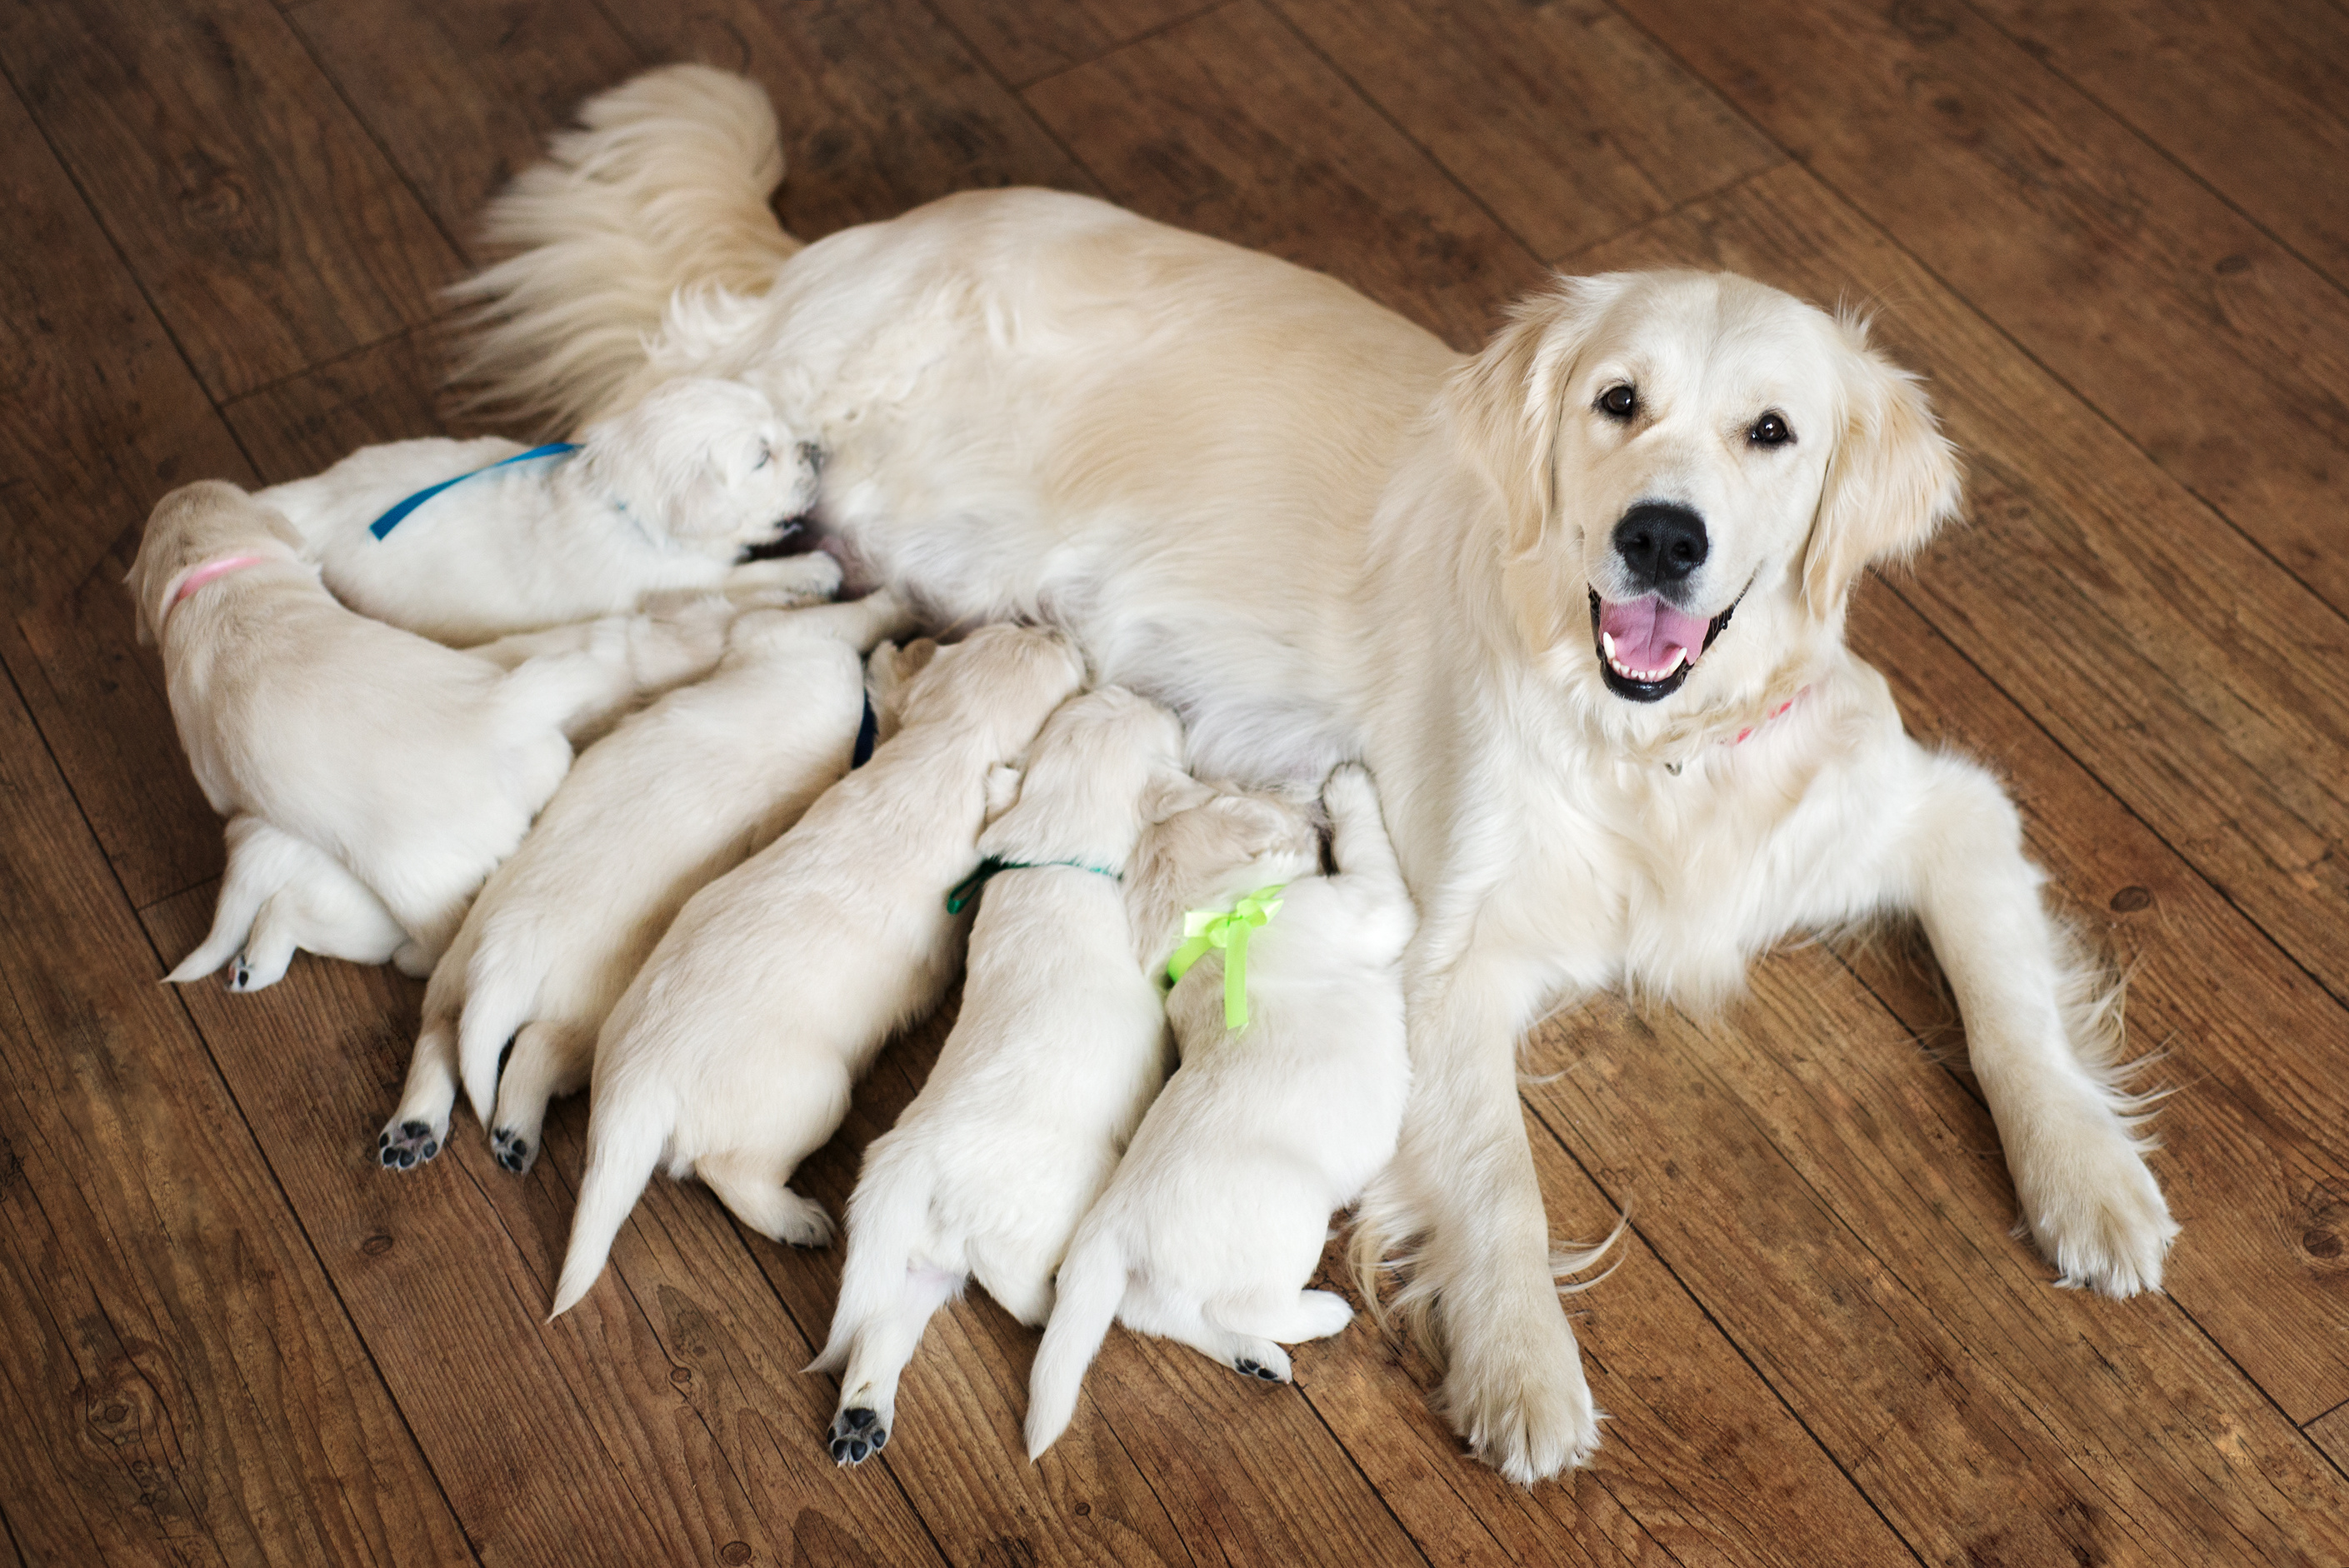 Birth Difficulties in Dogs